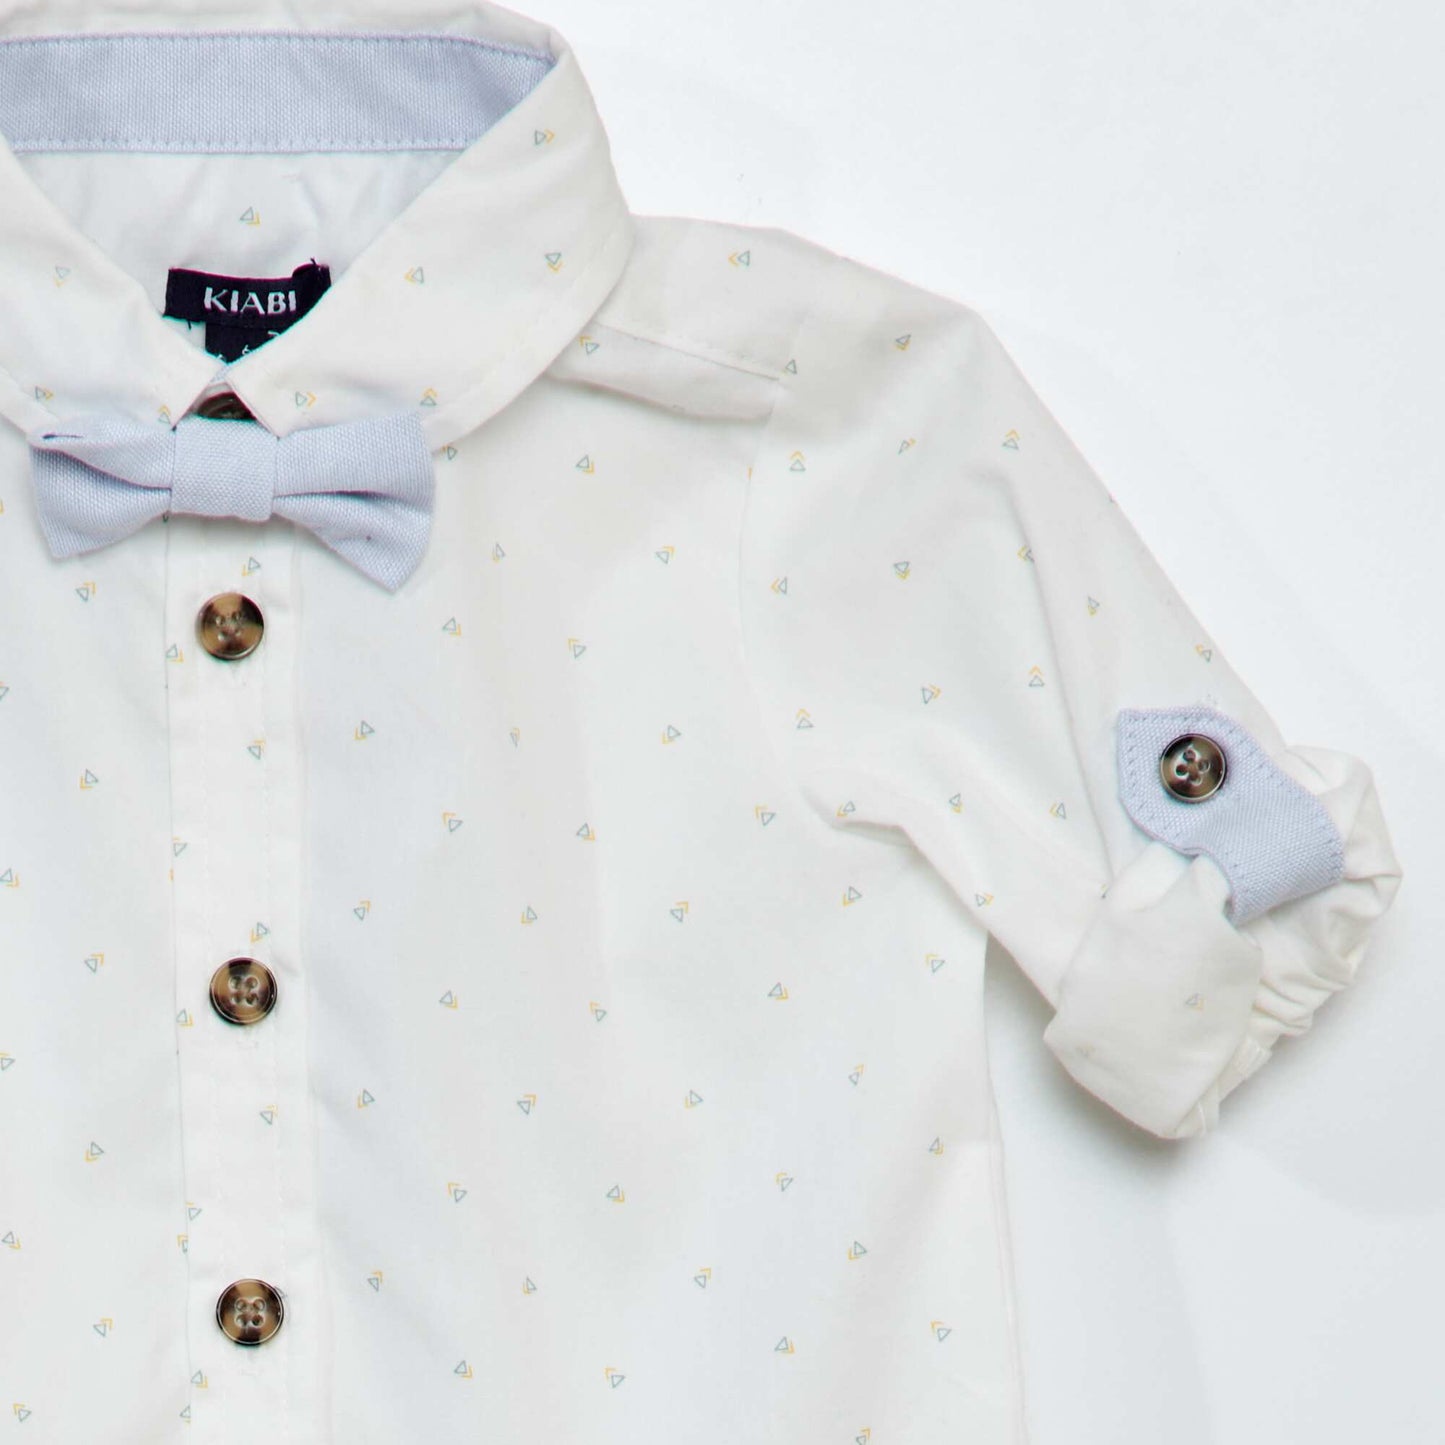 Shirt with bow tie WHITE